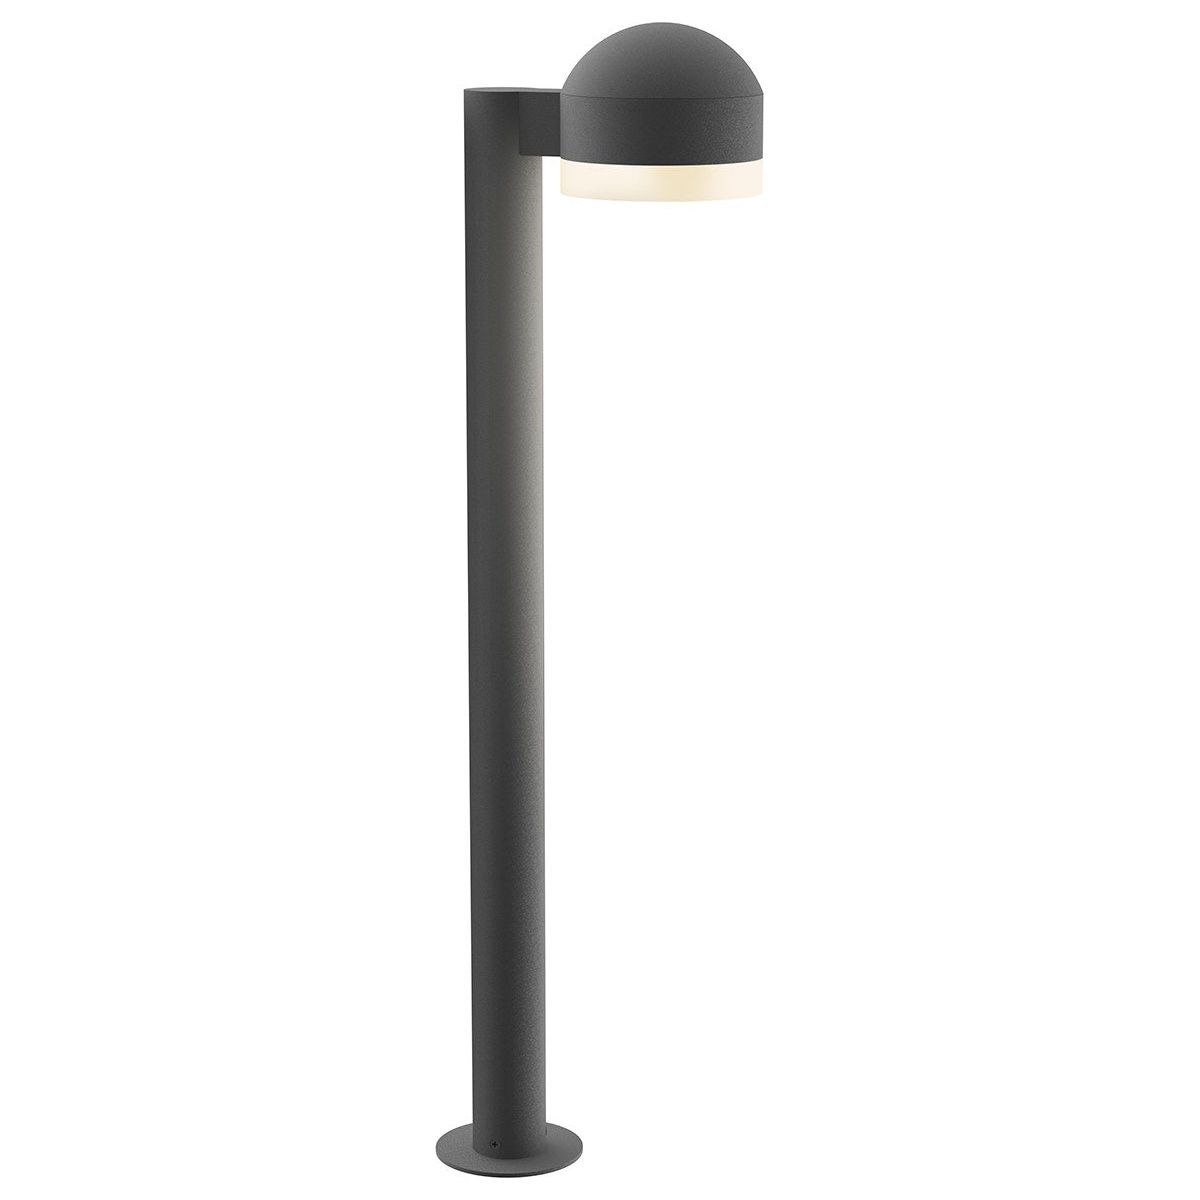 REALS 28" LED Bollard with Dome Cap and Cylinder Lens